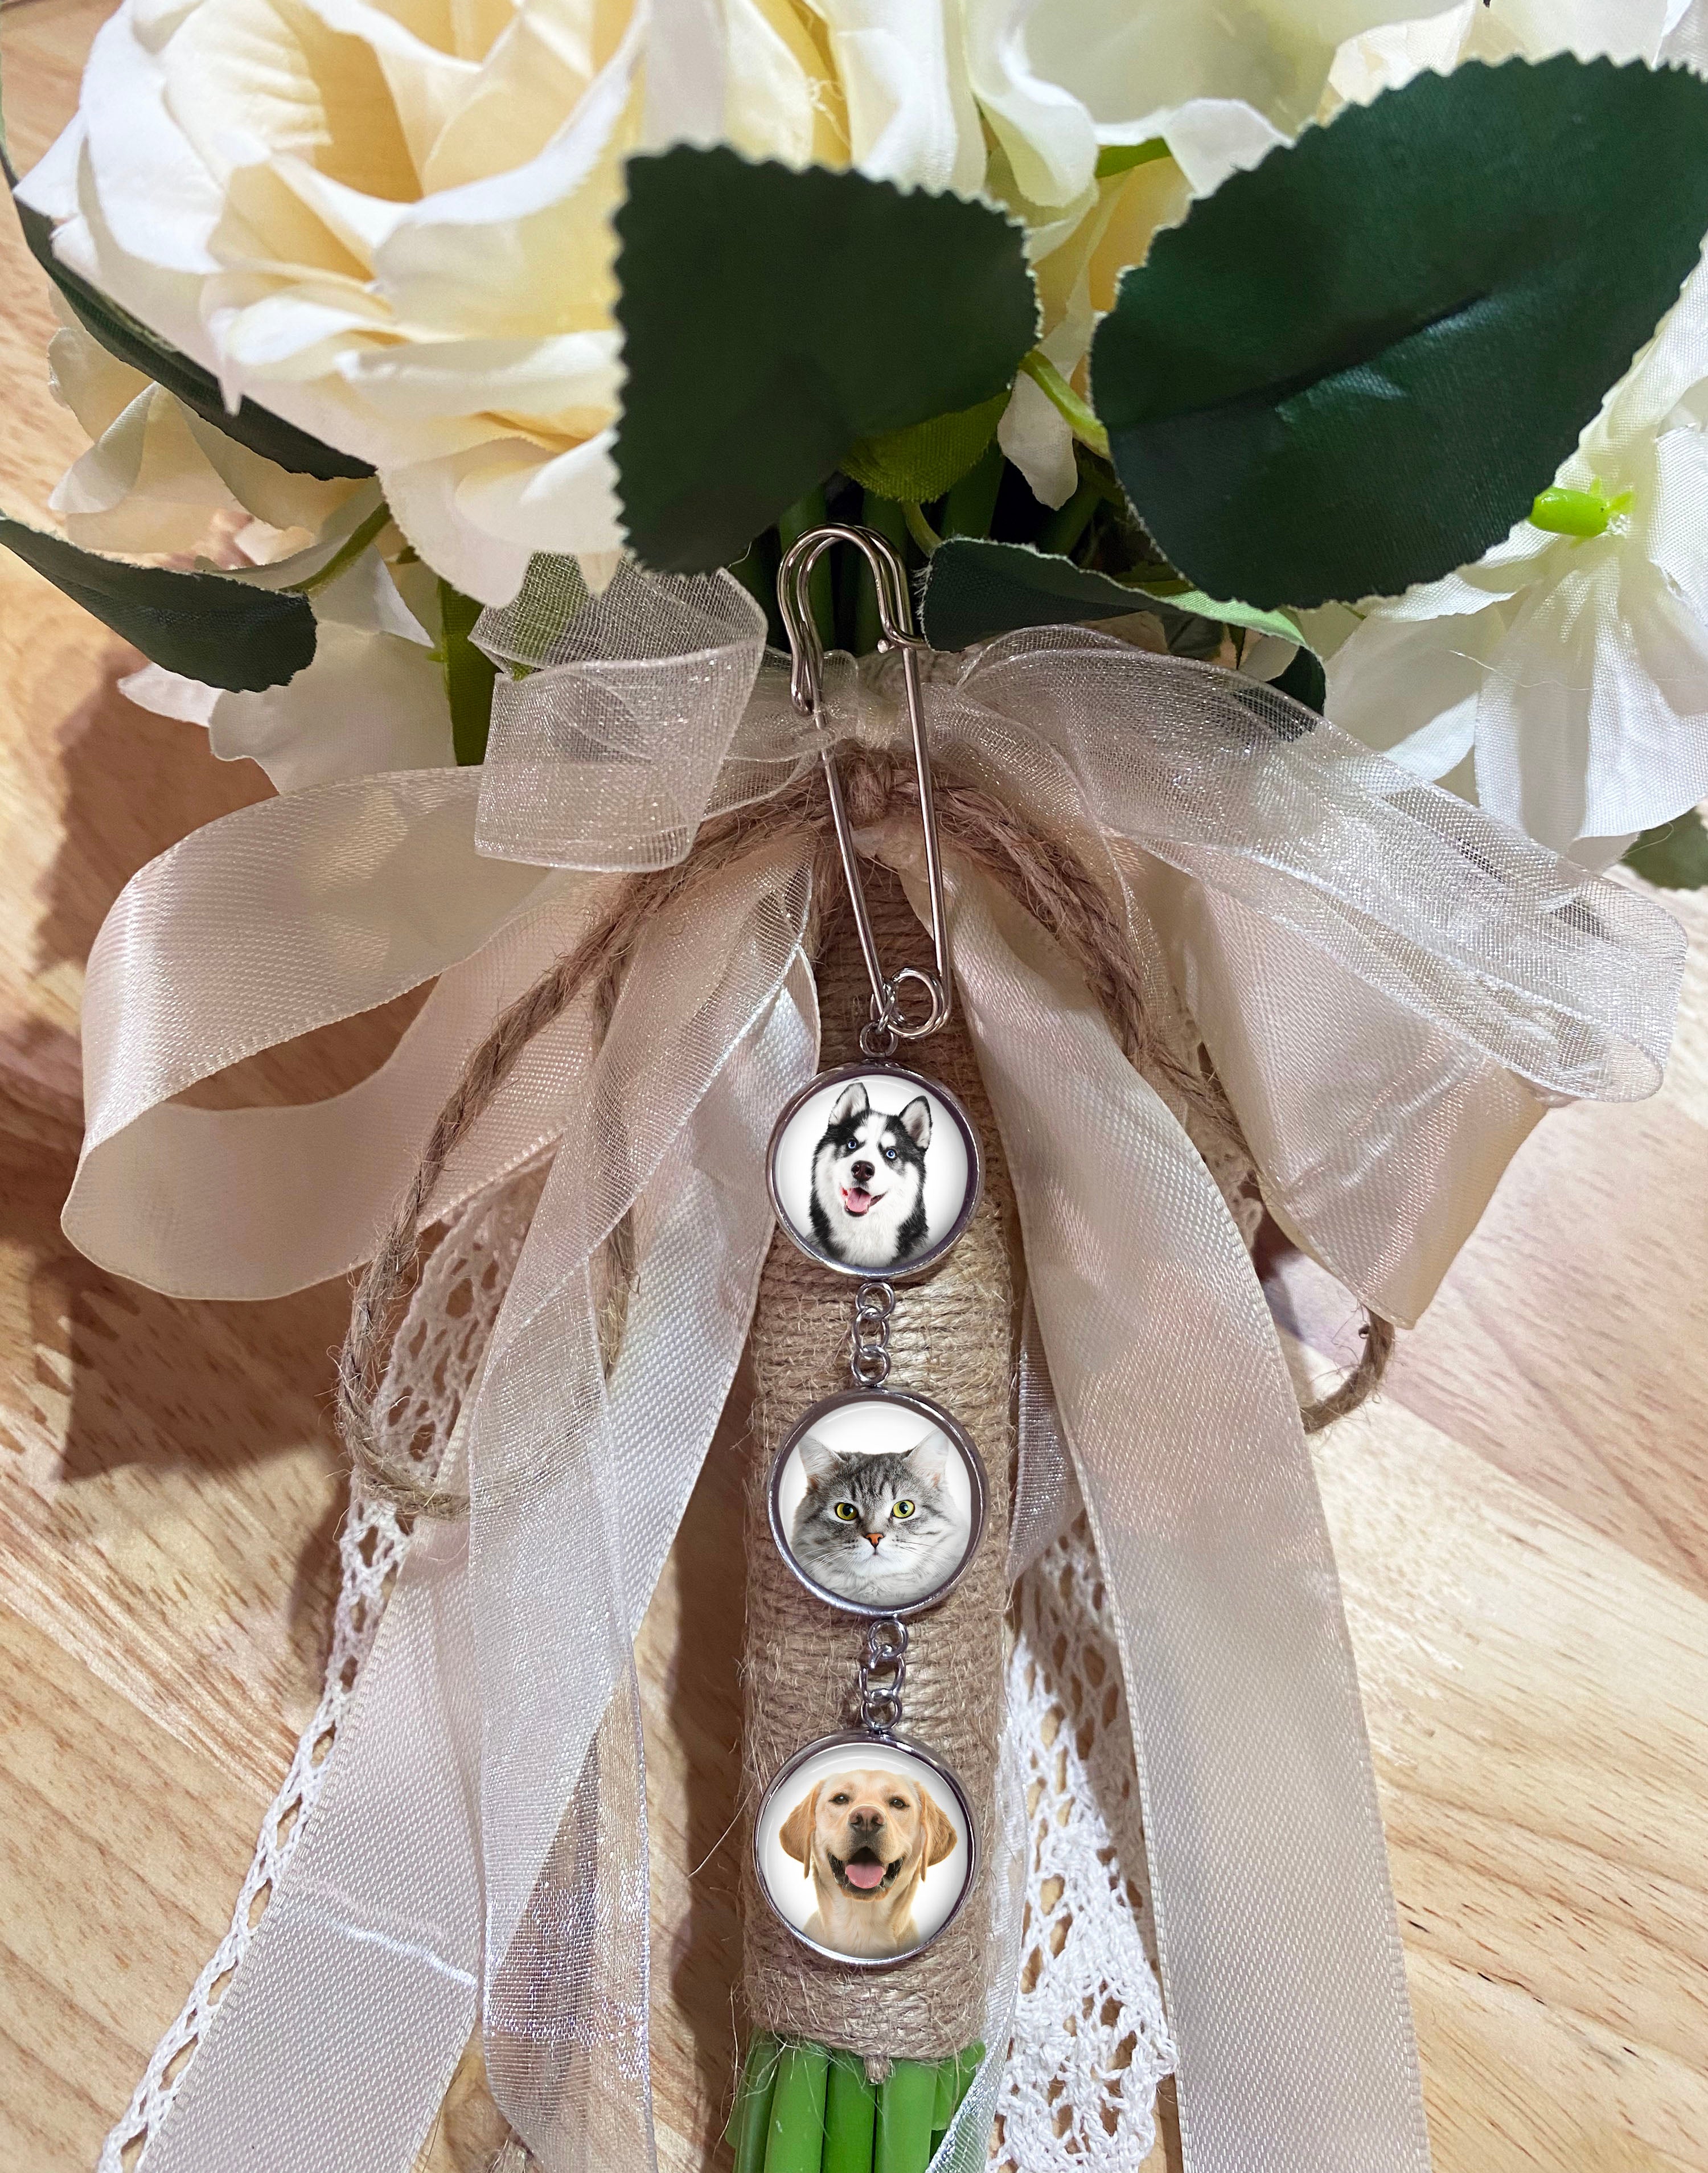 Charms for Bouquets, Photo Bouquet charm, Personalized Bouquet Charm,  Wedding Memory Charm, Gift for Best Friend, Flower Bouquet Charm